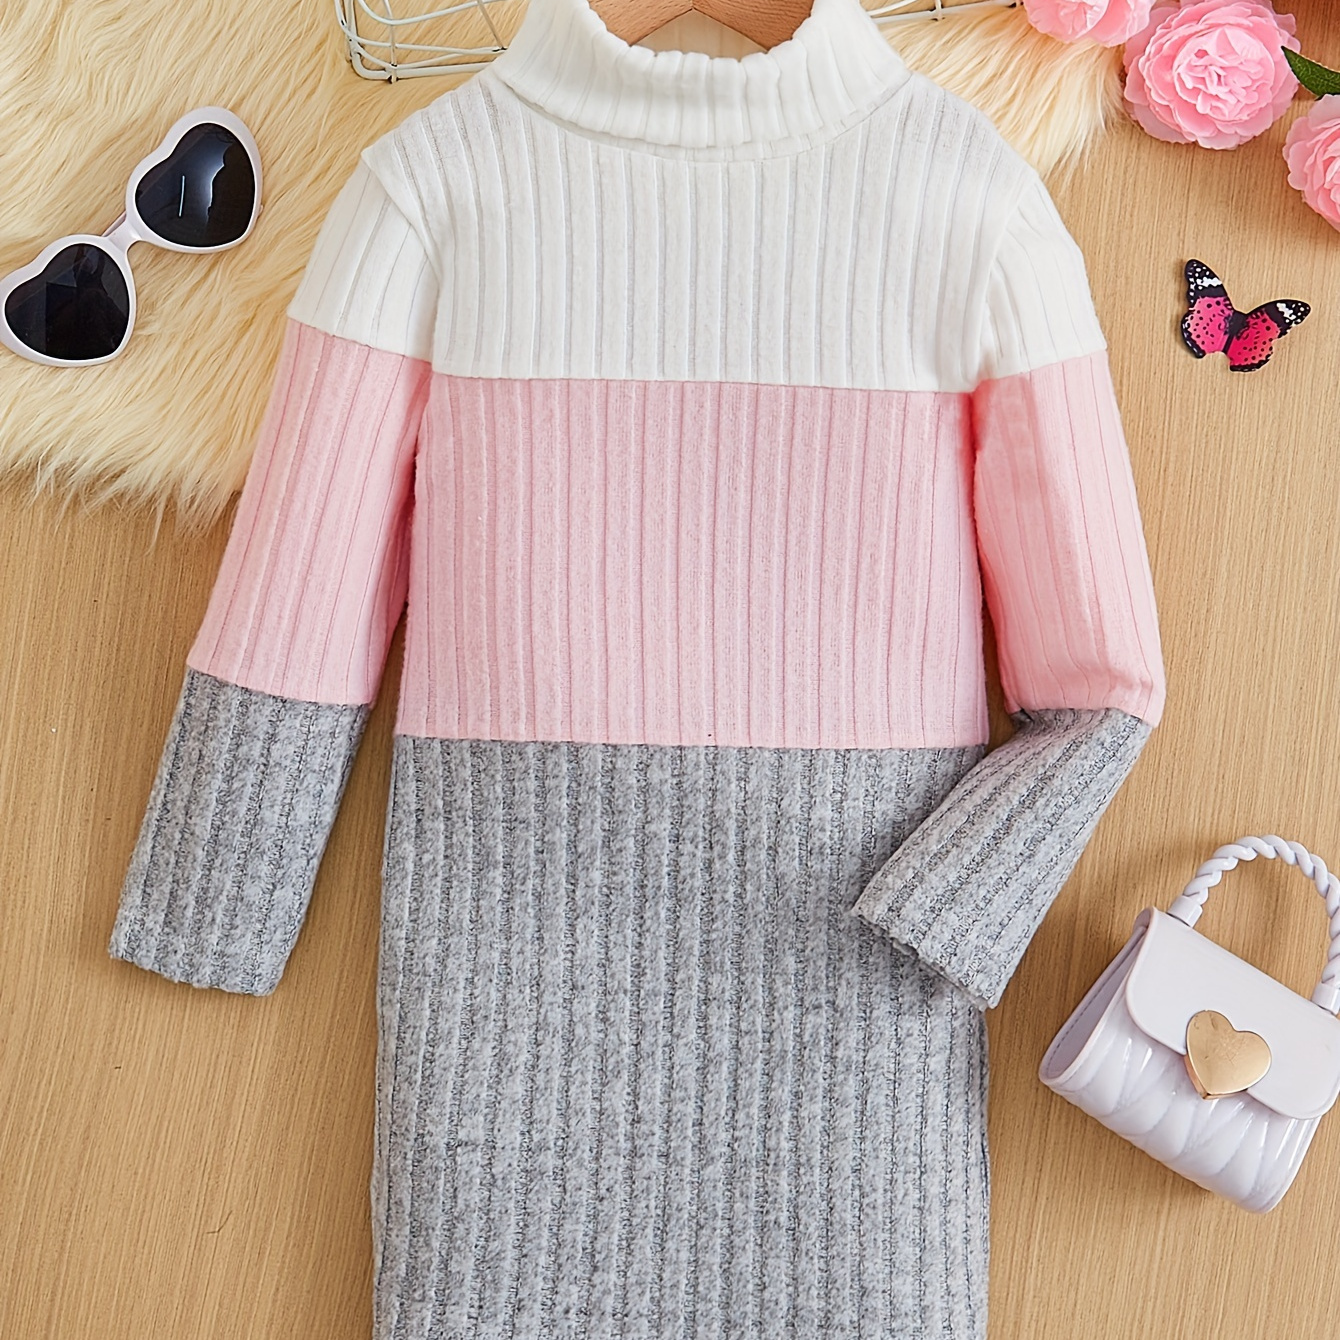 

Girls Splicing Ribbed Knit Turtleneck Dress Kids Clothes Party Gift 3-8y